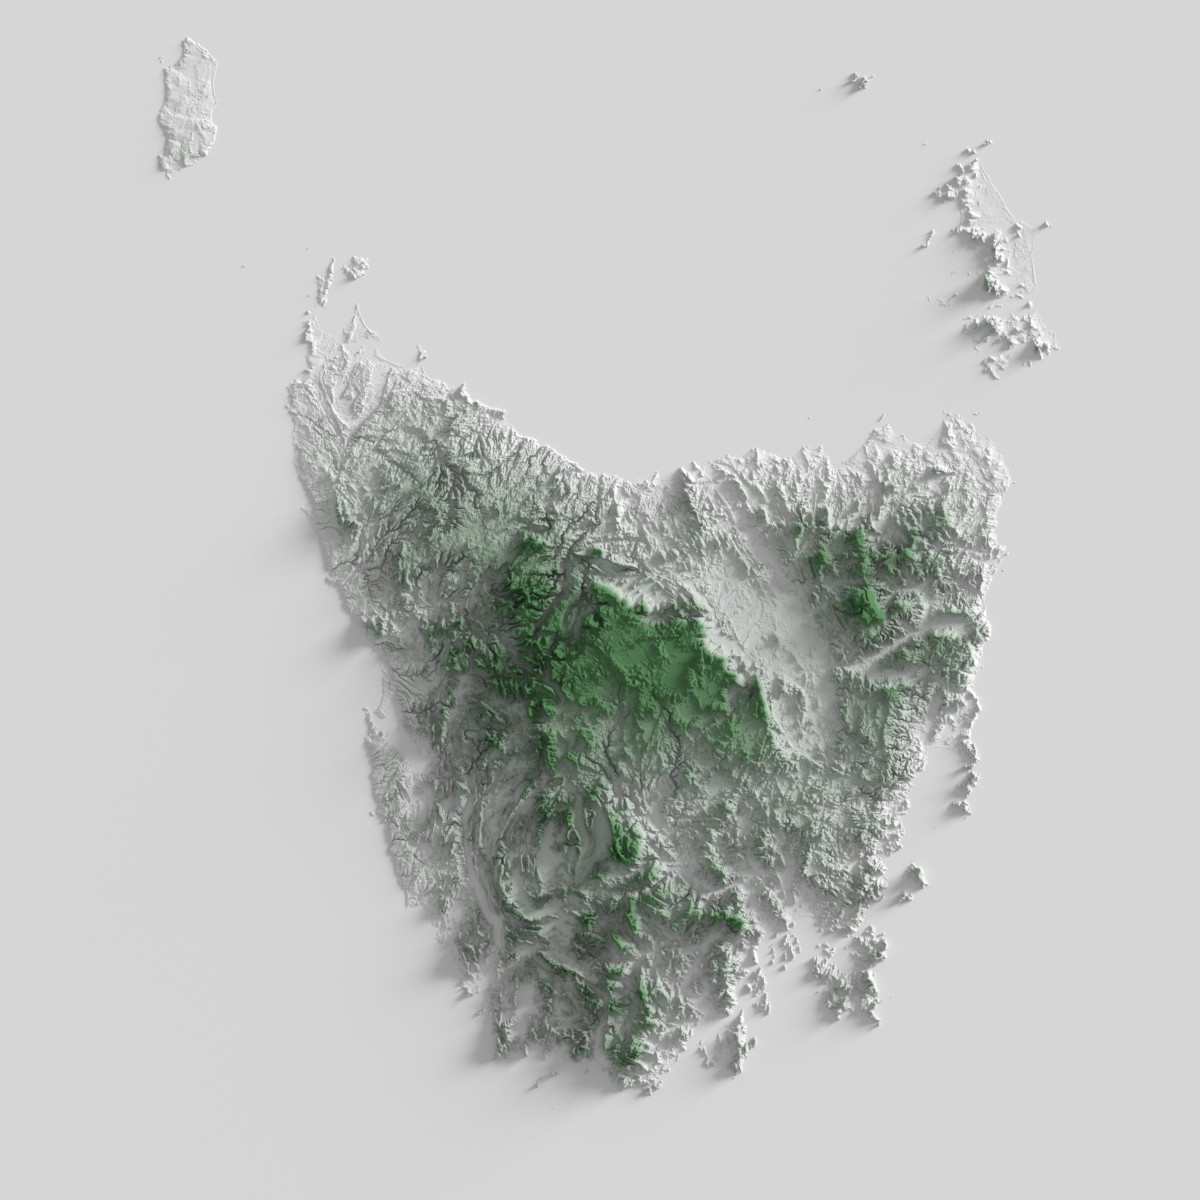 Preview of terrain heightmap render of the Australian state of Tasmania using heightfield shading mapping